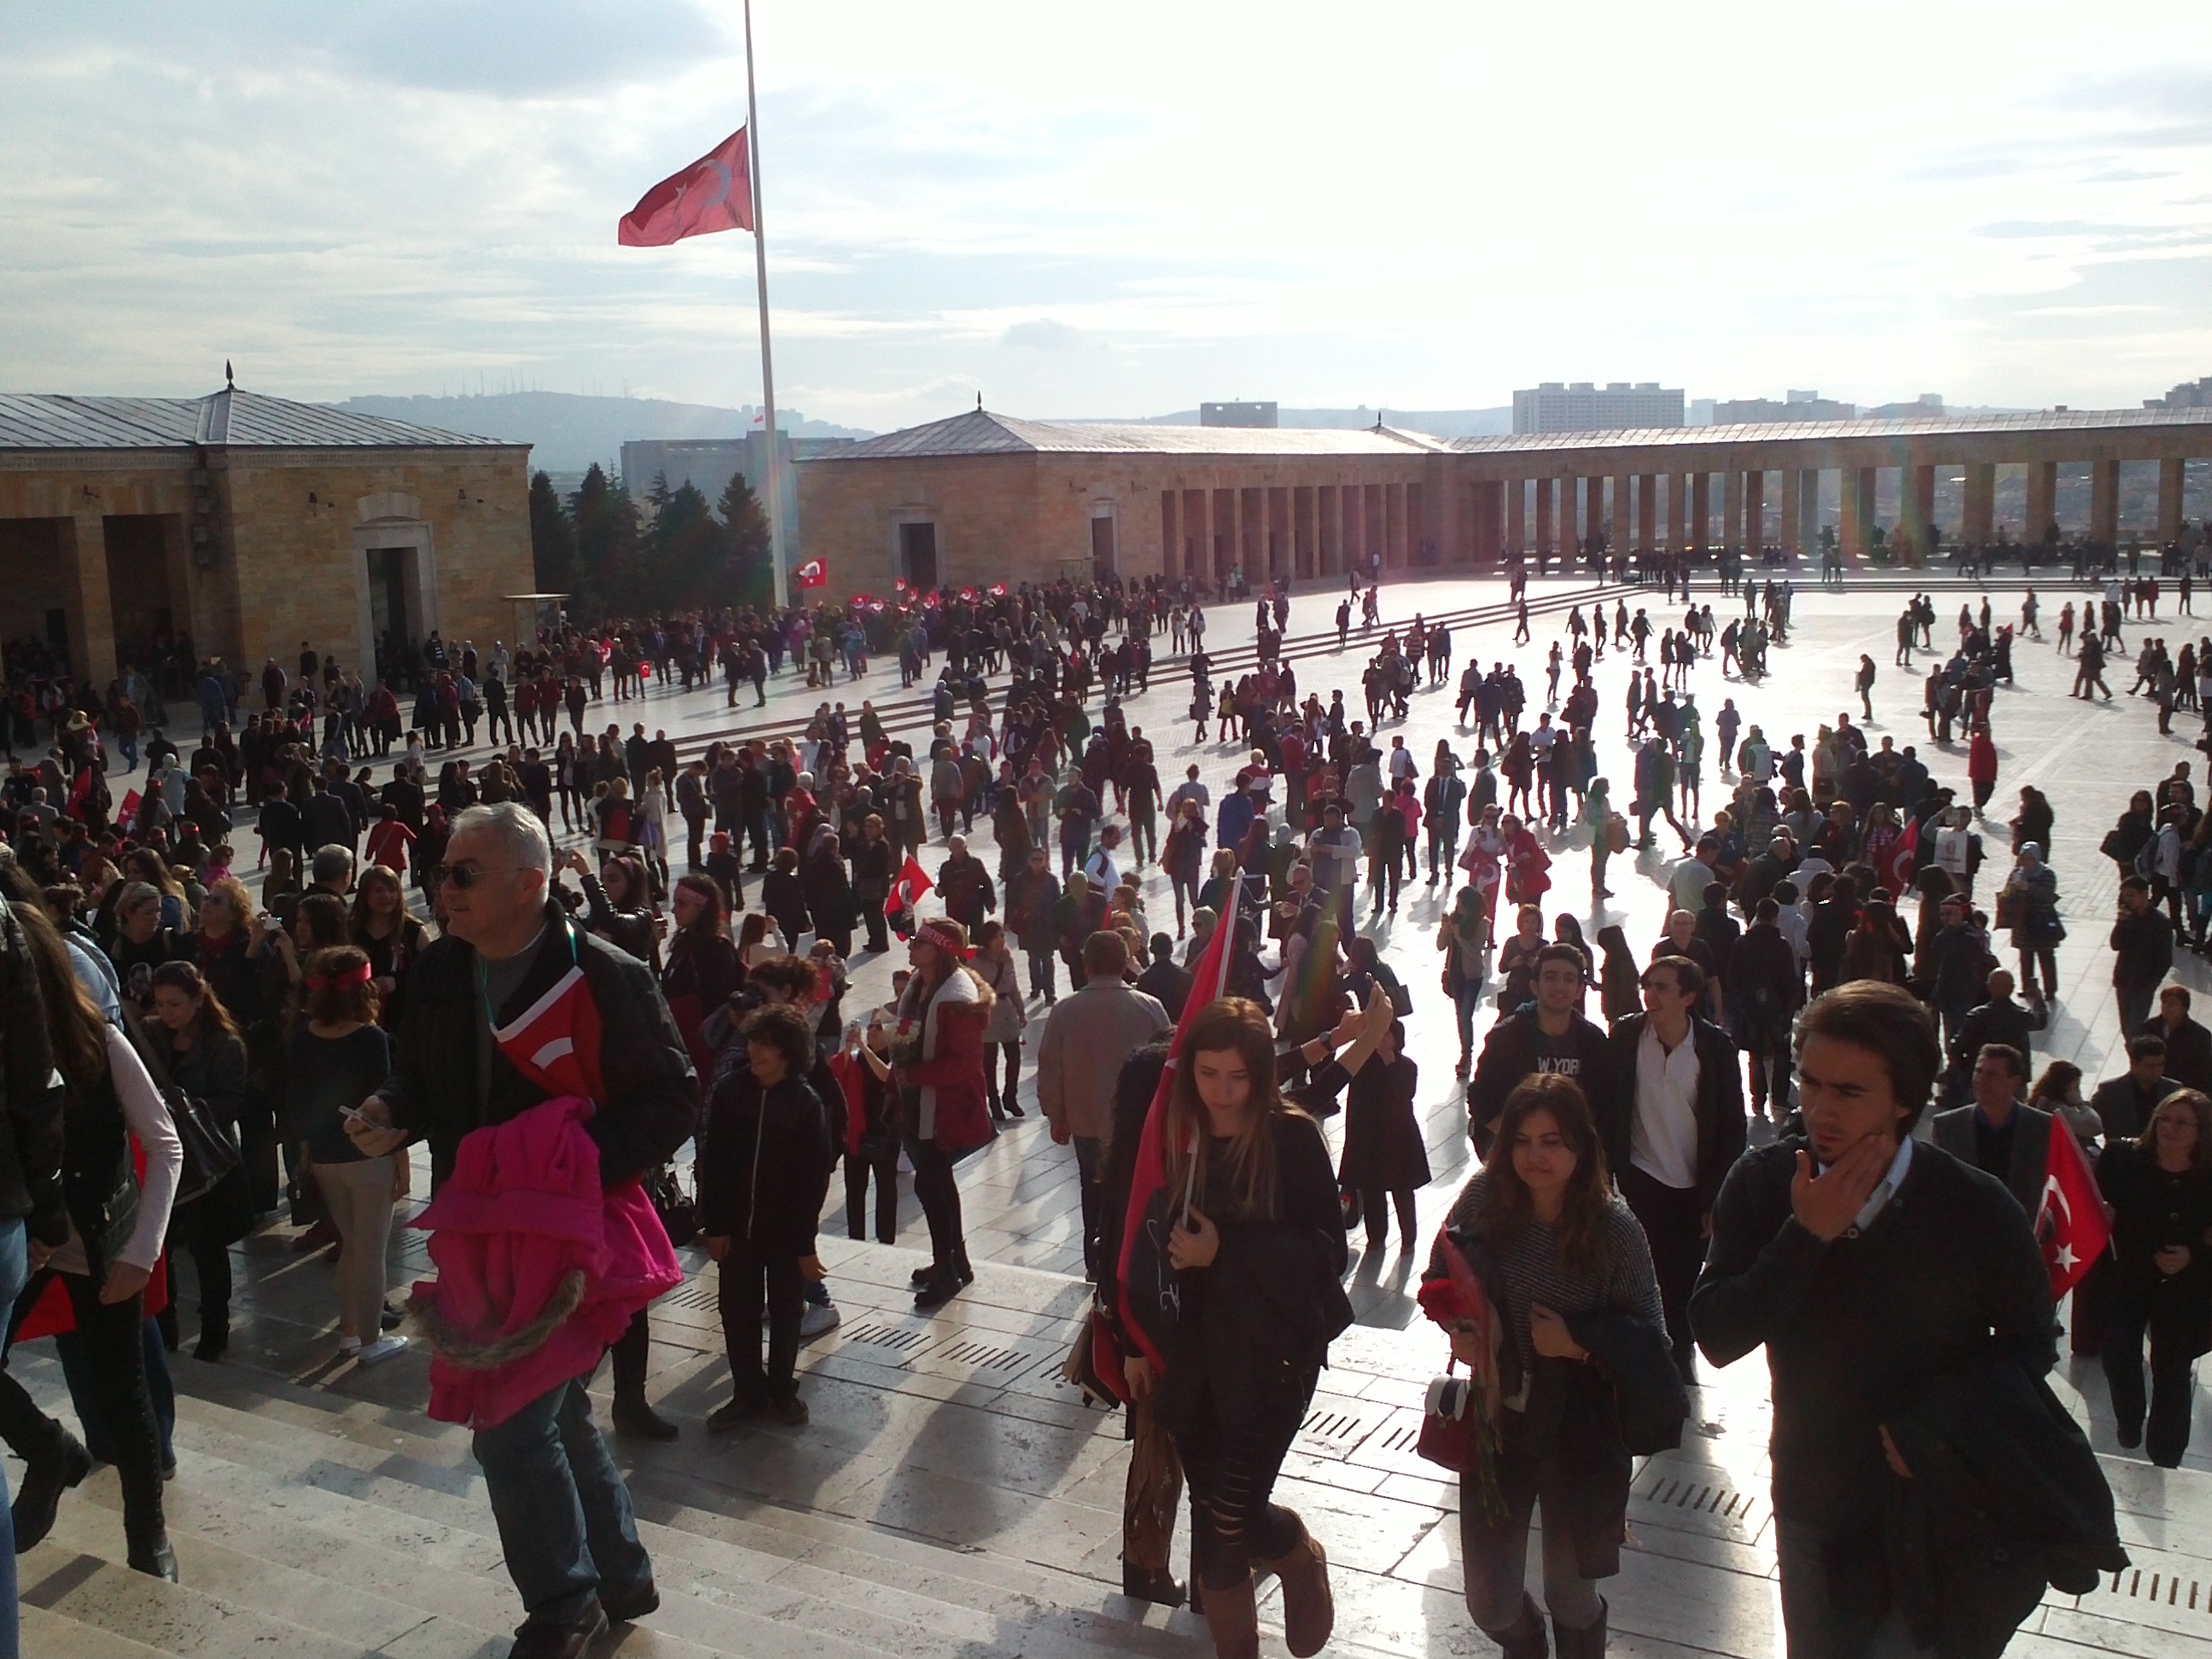 Hundreds of thousands of people coming to Ankara based mausoleum of Mustafa Kemal Atatürk, the founder of the country.